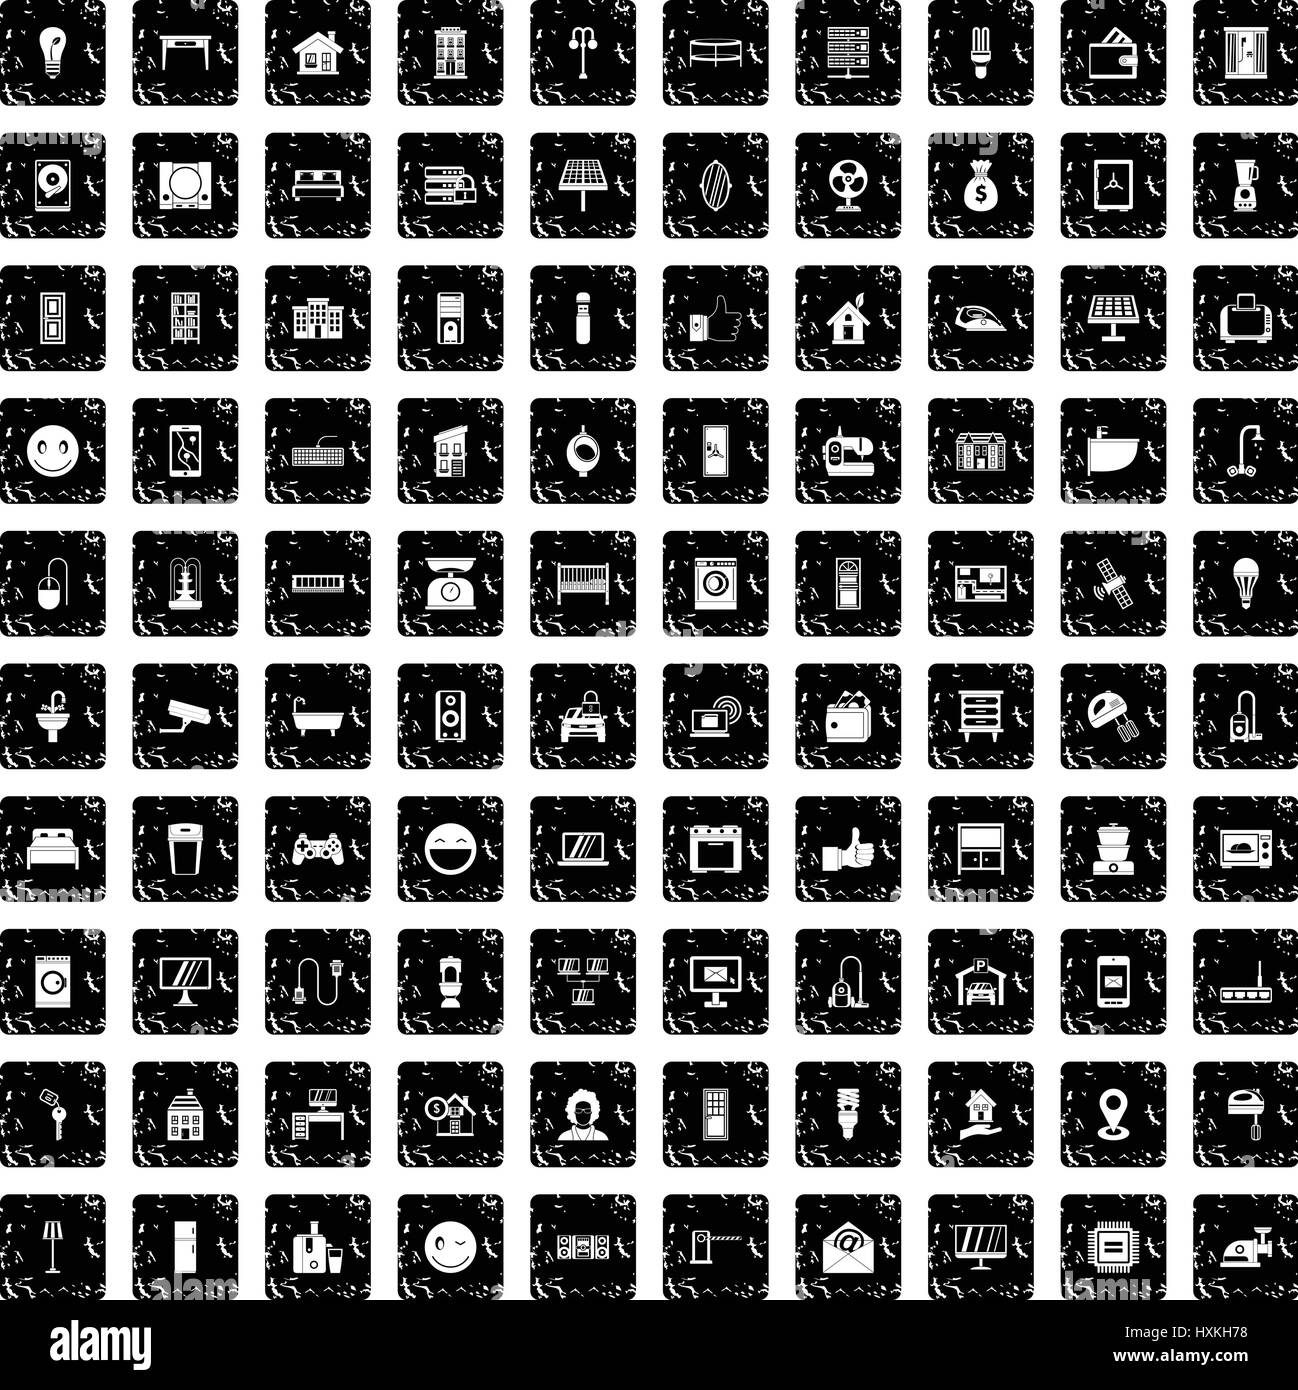 100 smart house icons set, grunge style Stock Vector